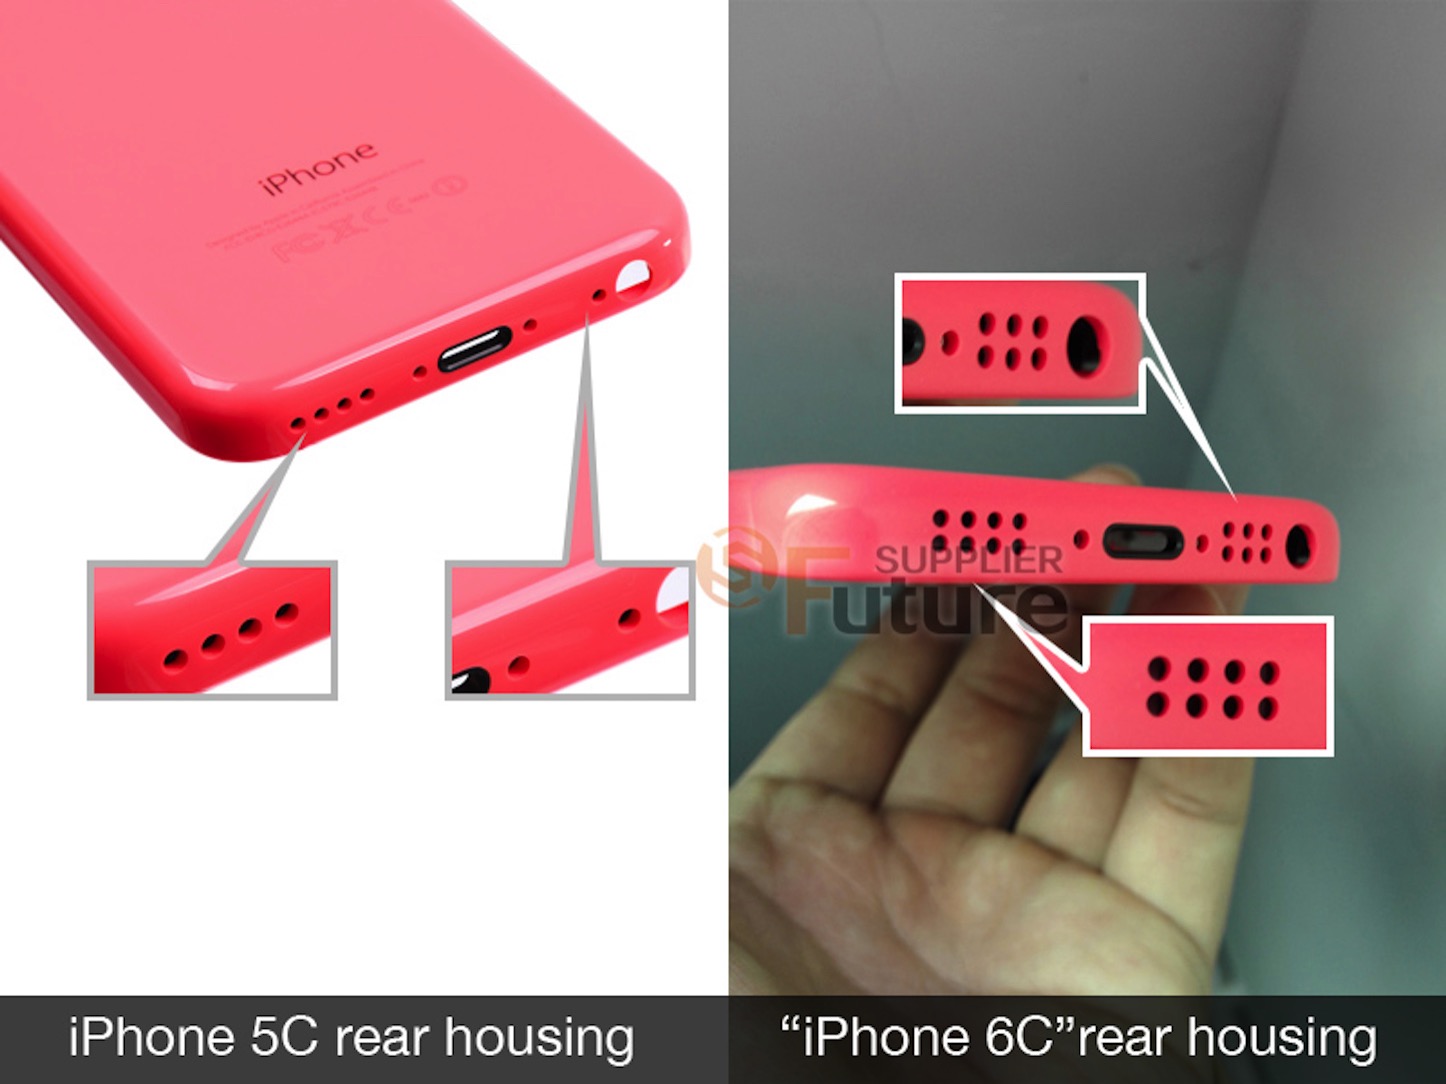 iPhone-6c-back-cover-leaked-images-2.jpg